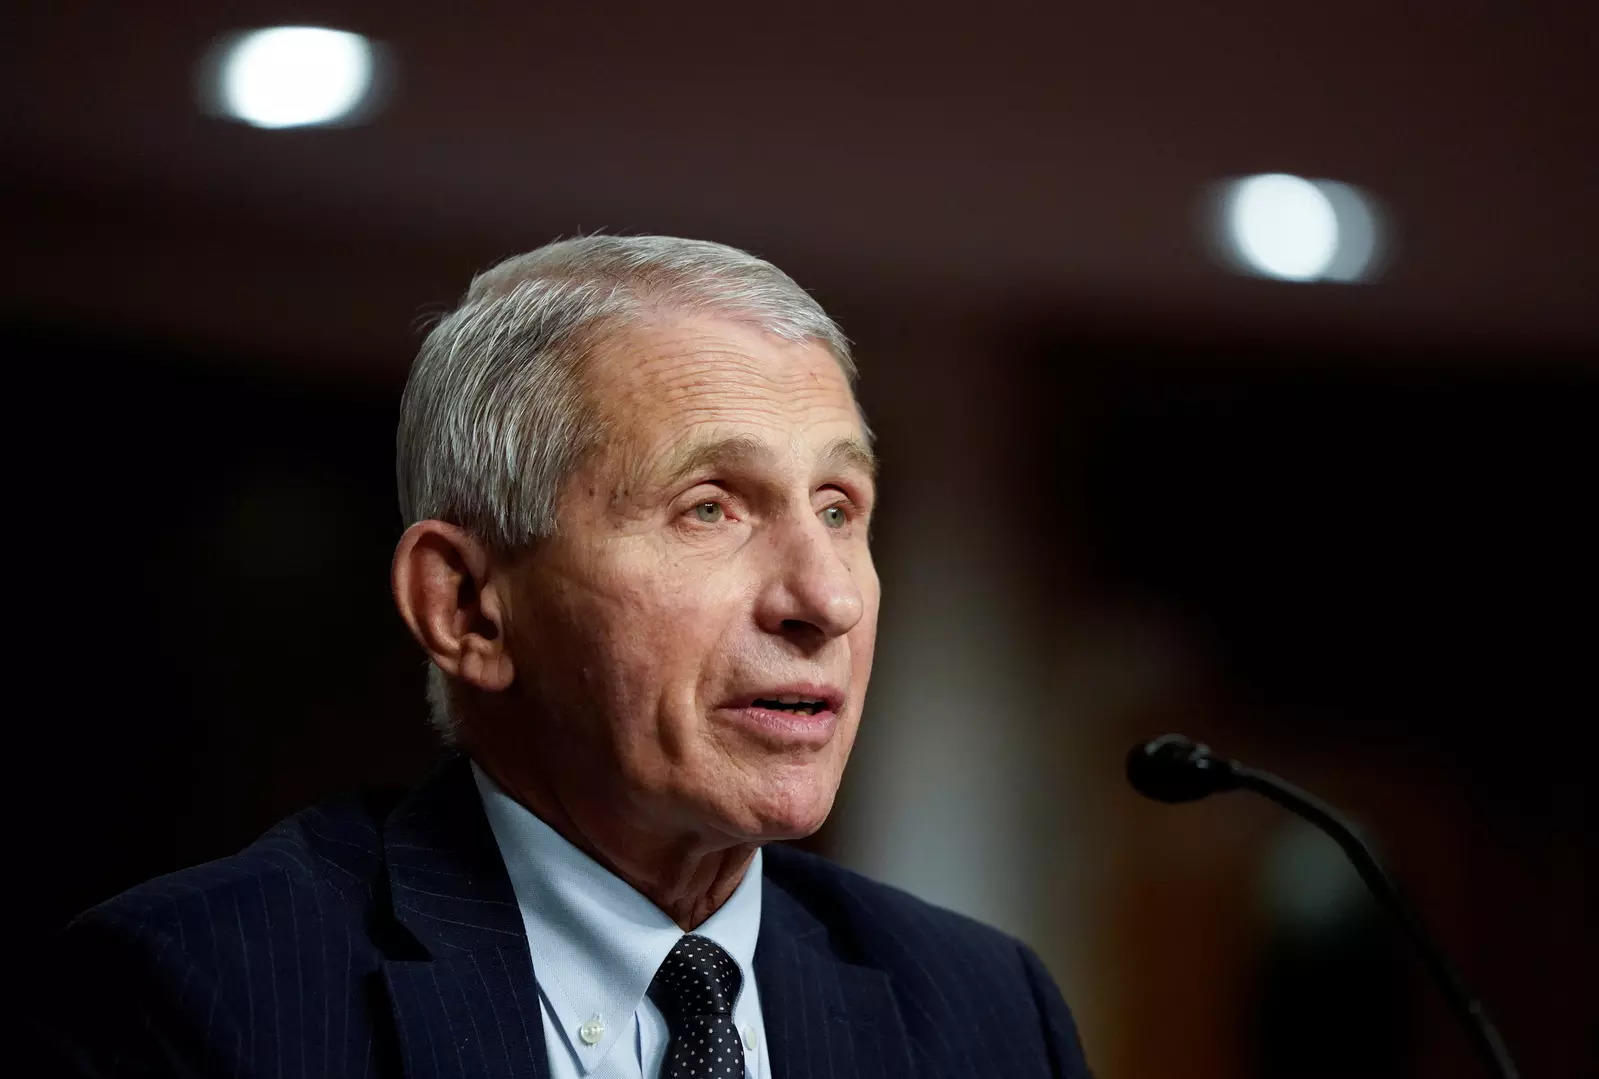 Fauci says US must study data before deciding on travel ban over new COVID-19 variant